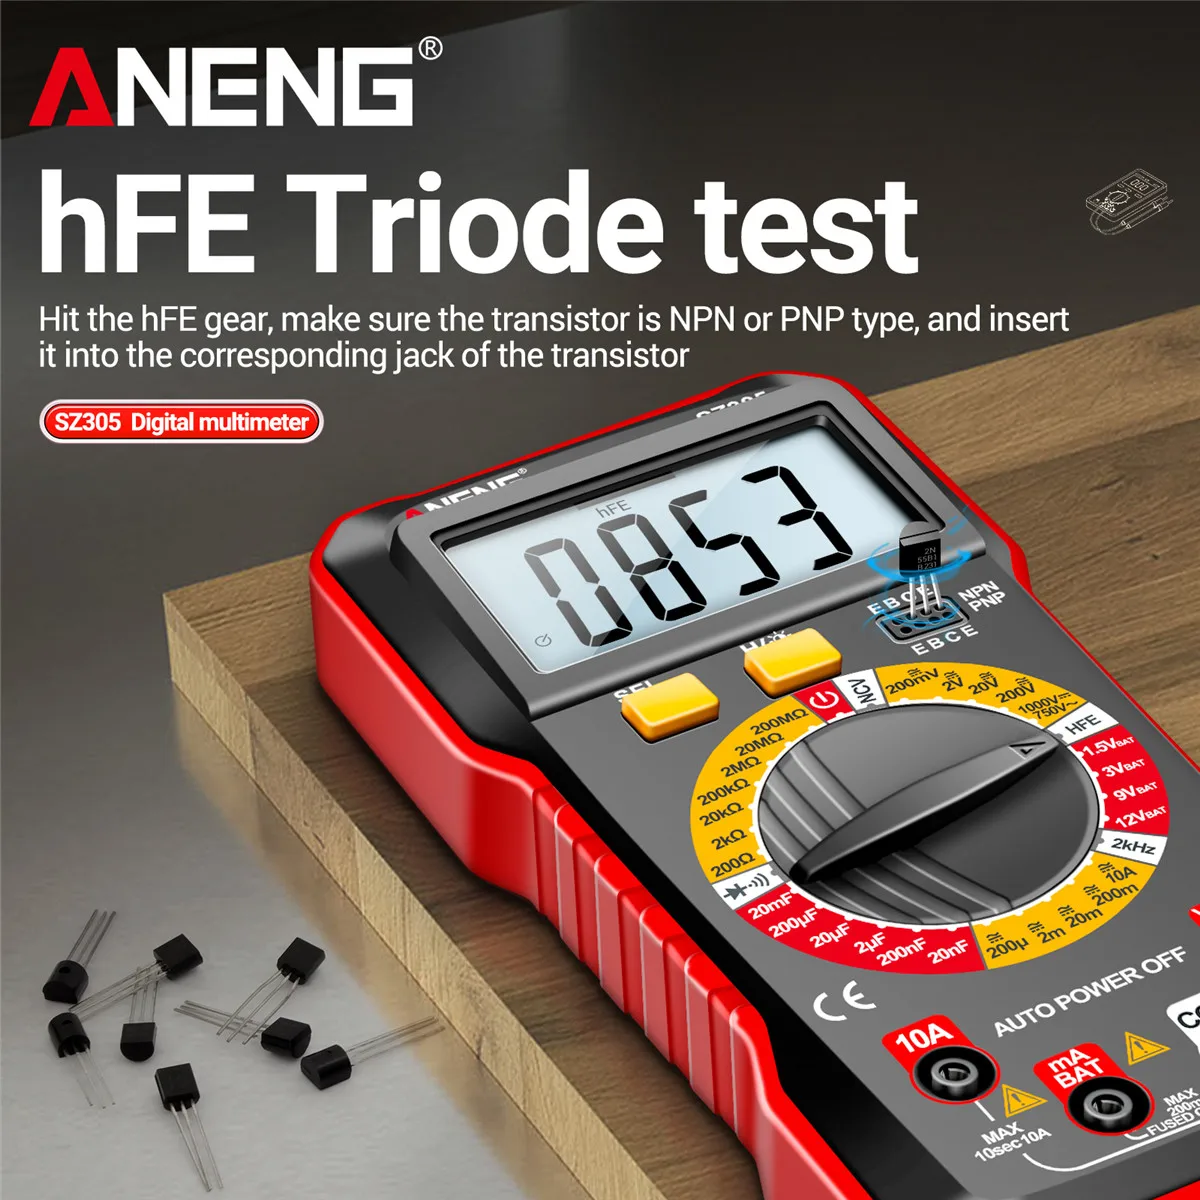 aneng sz305 multimeter capacitor testers professional